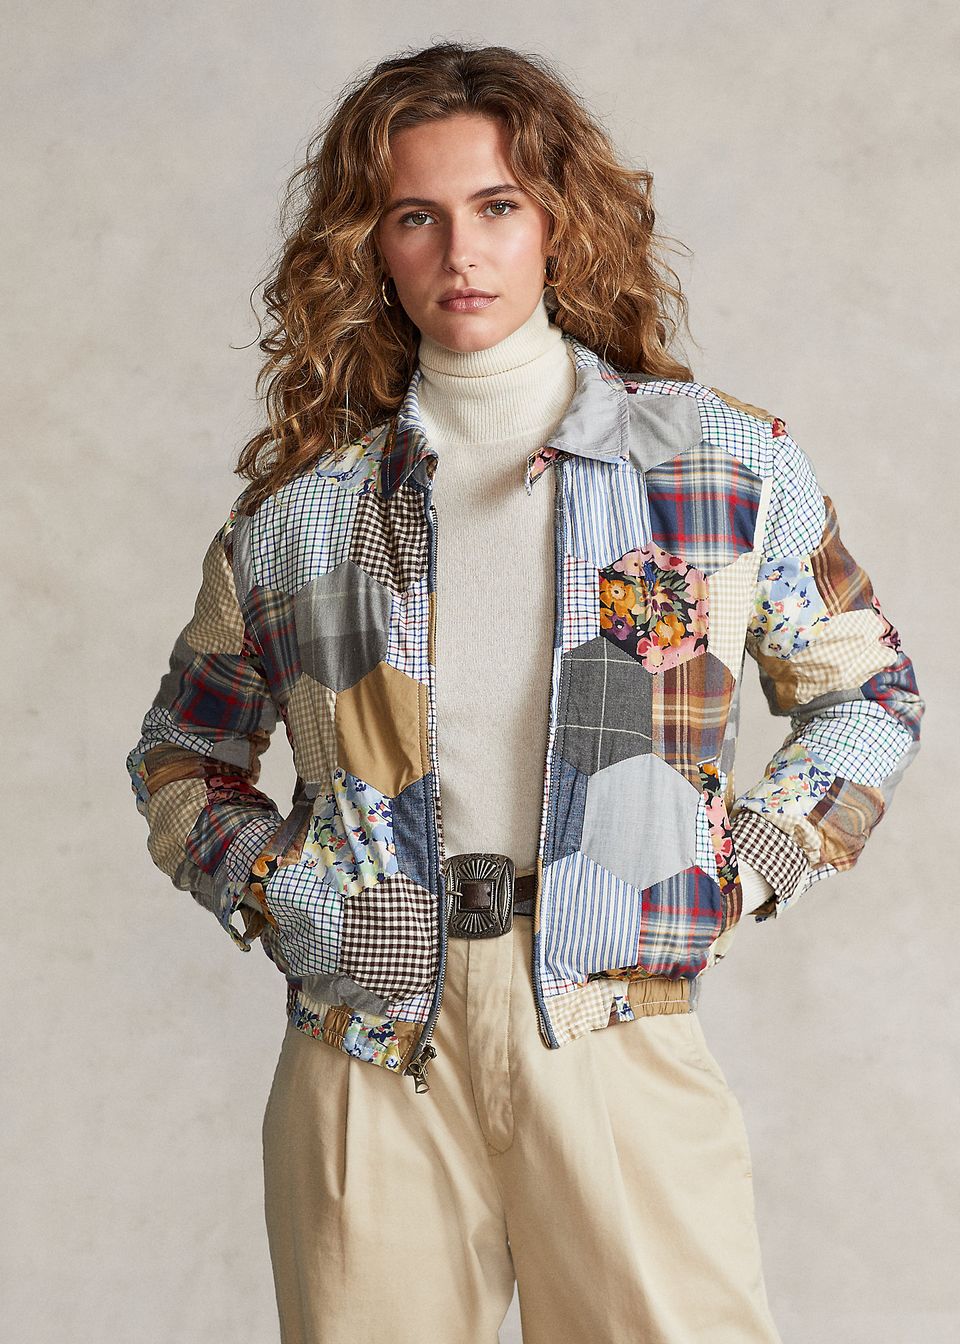 'Quilted' And Patchwork Jackets That Remind You Of Your Granny, But In ...